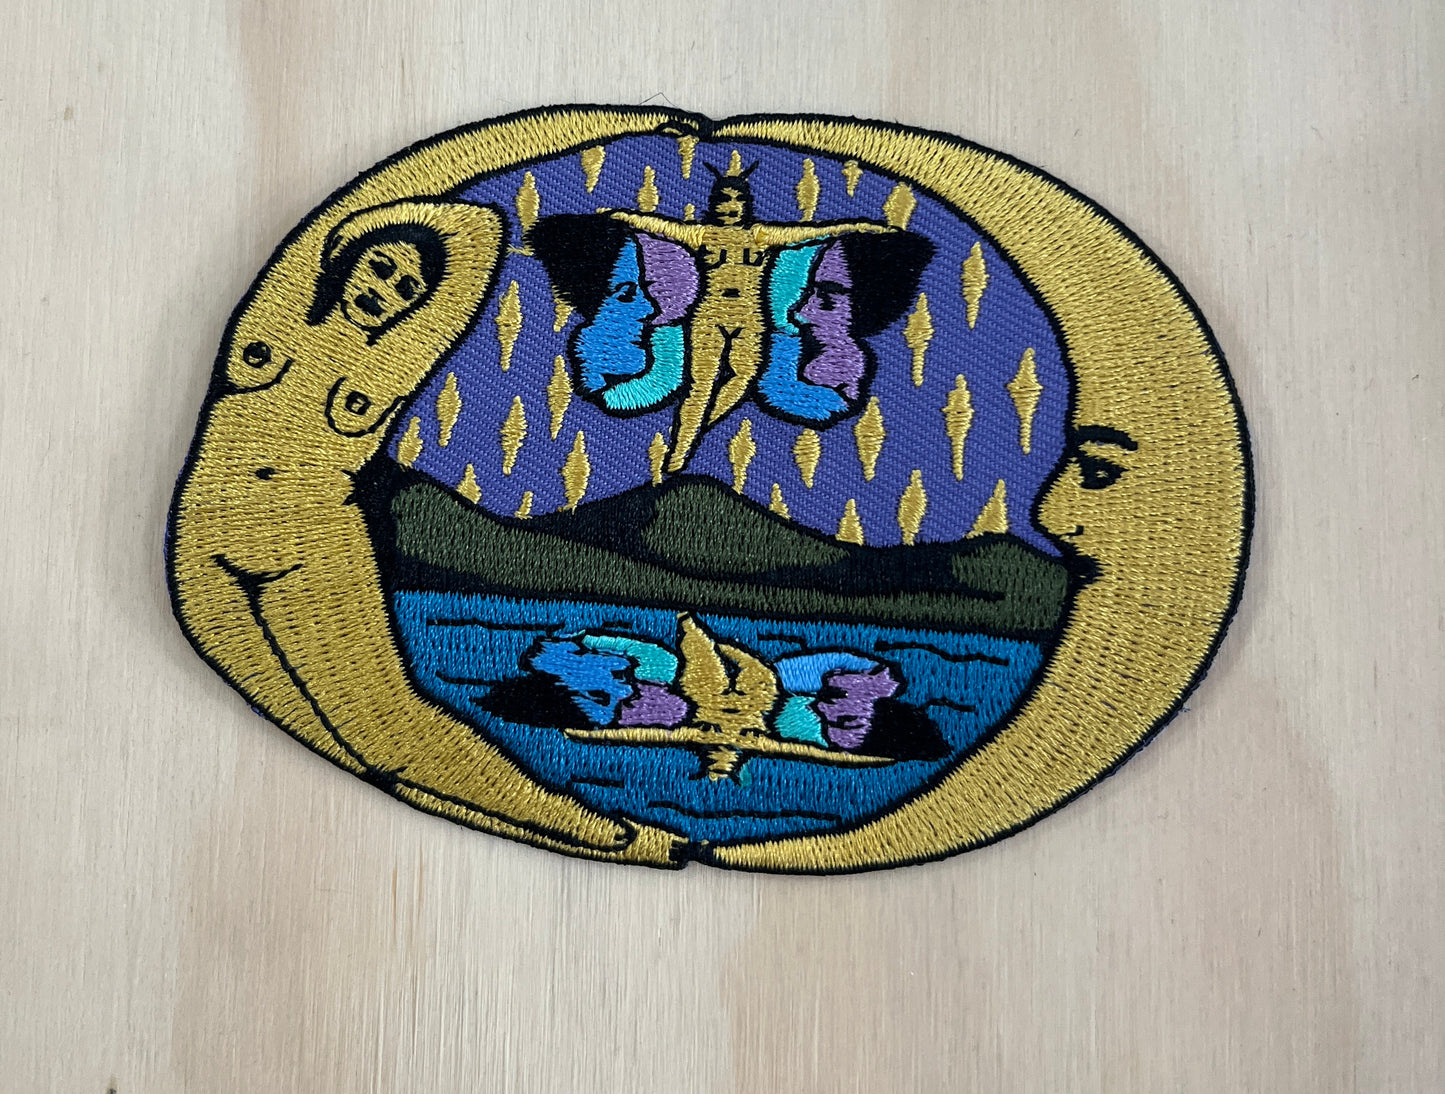 Embroidered Patch - Sabrina Bosco